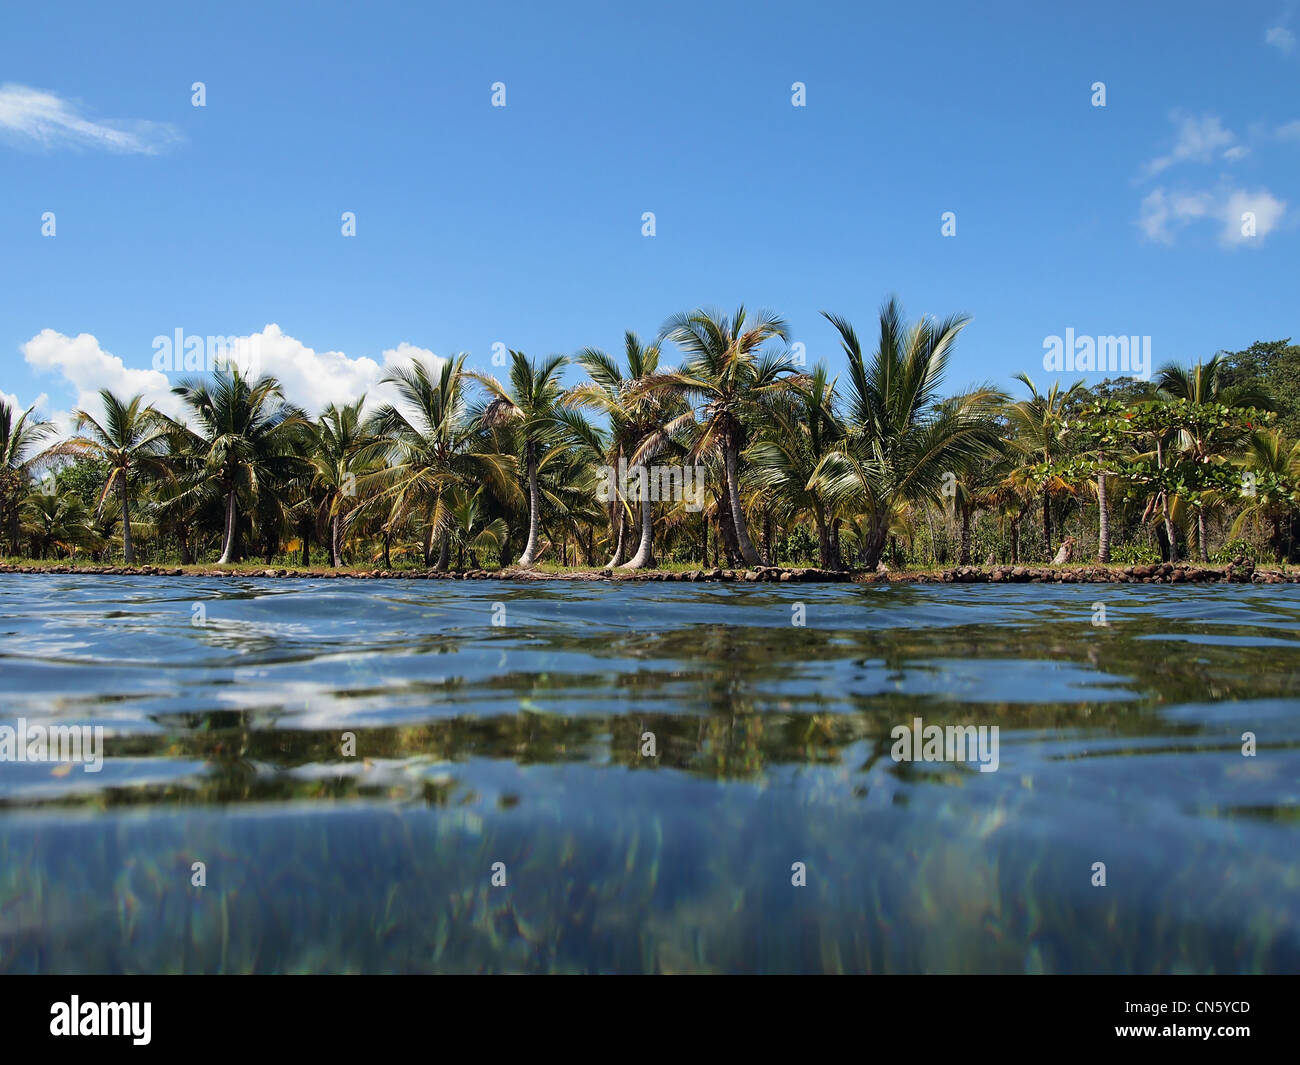 Tropical shore with coconut trees seen from water surface, Caribbean sea, Panama, Central America Stock Photo